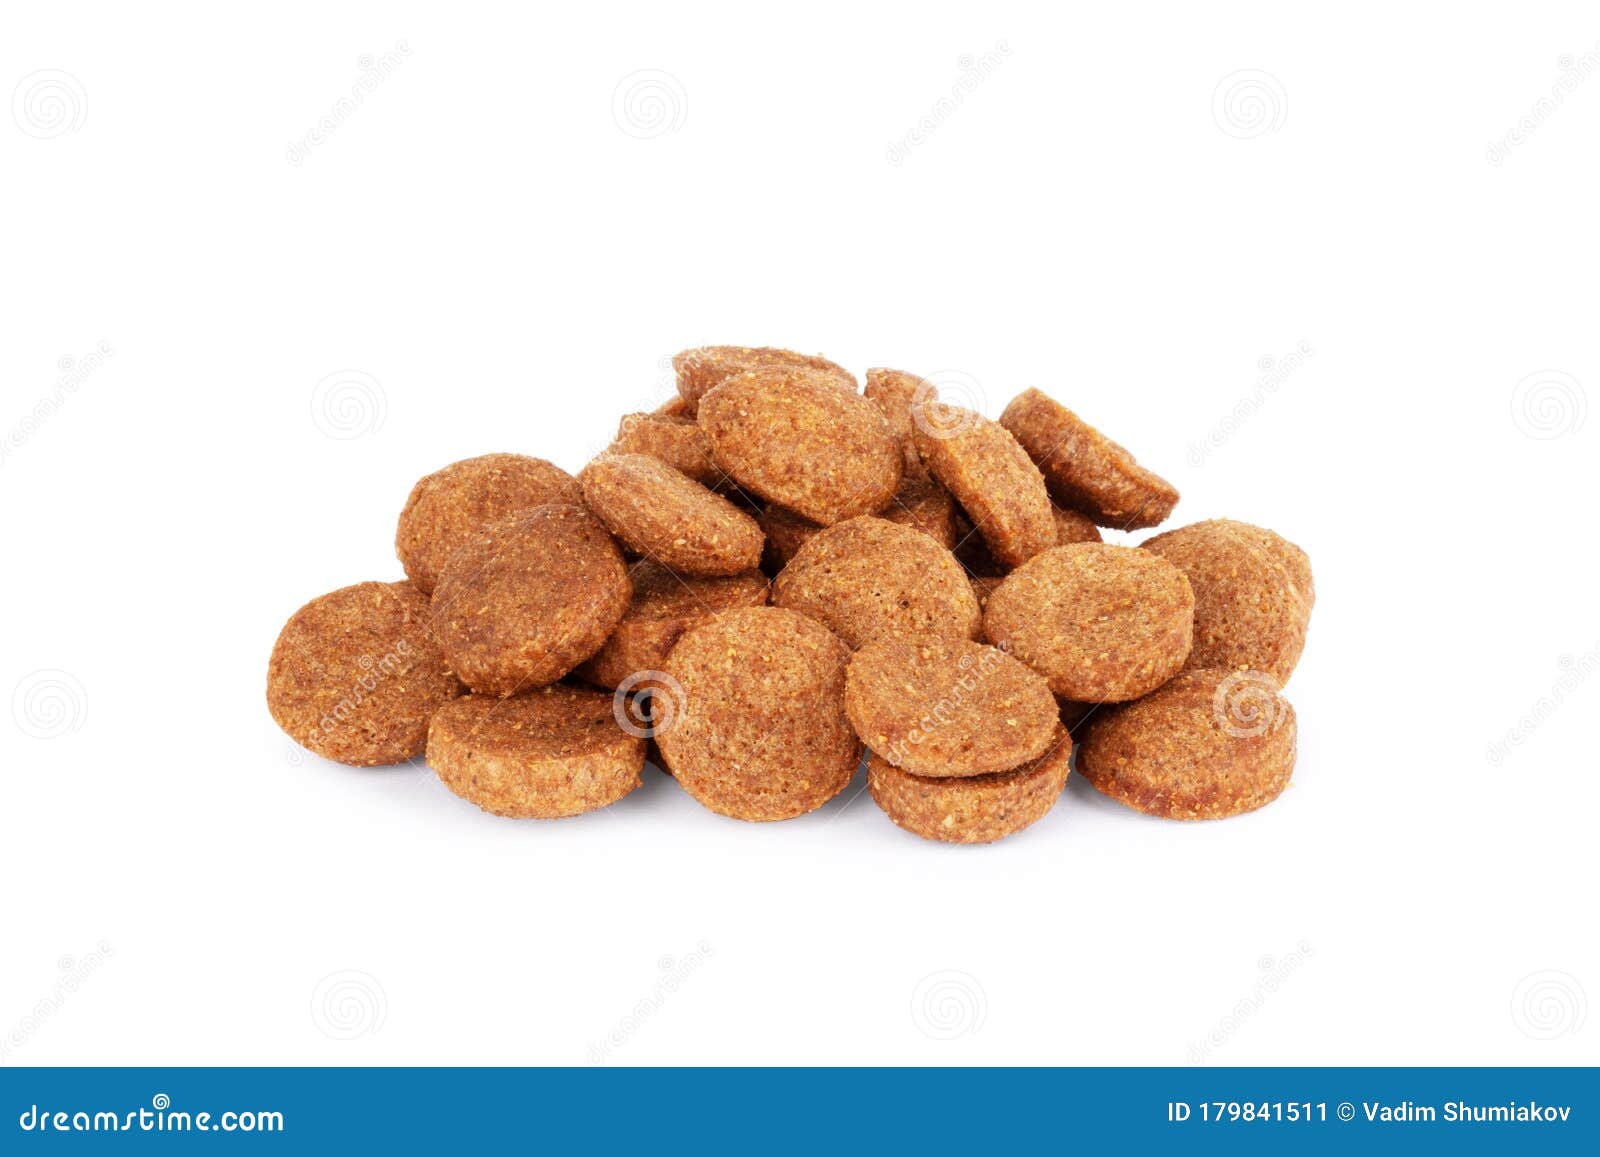 dry dog food on a white background